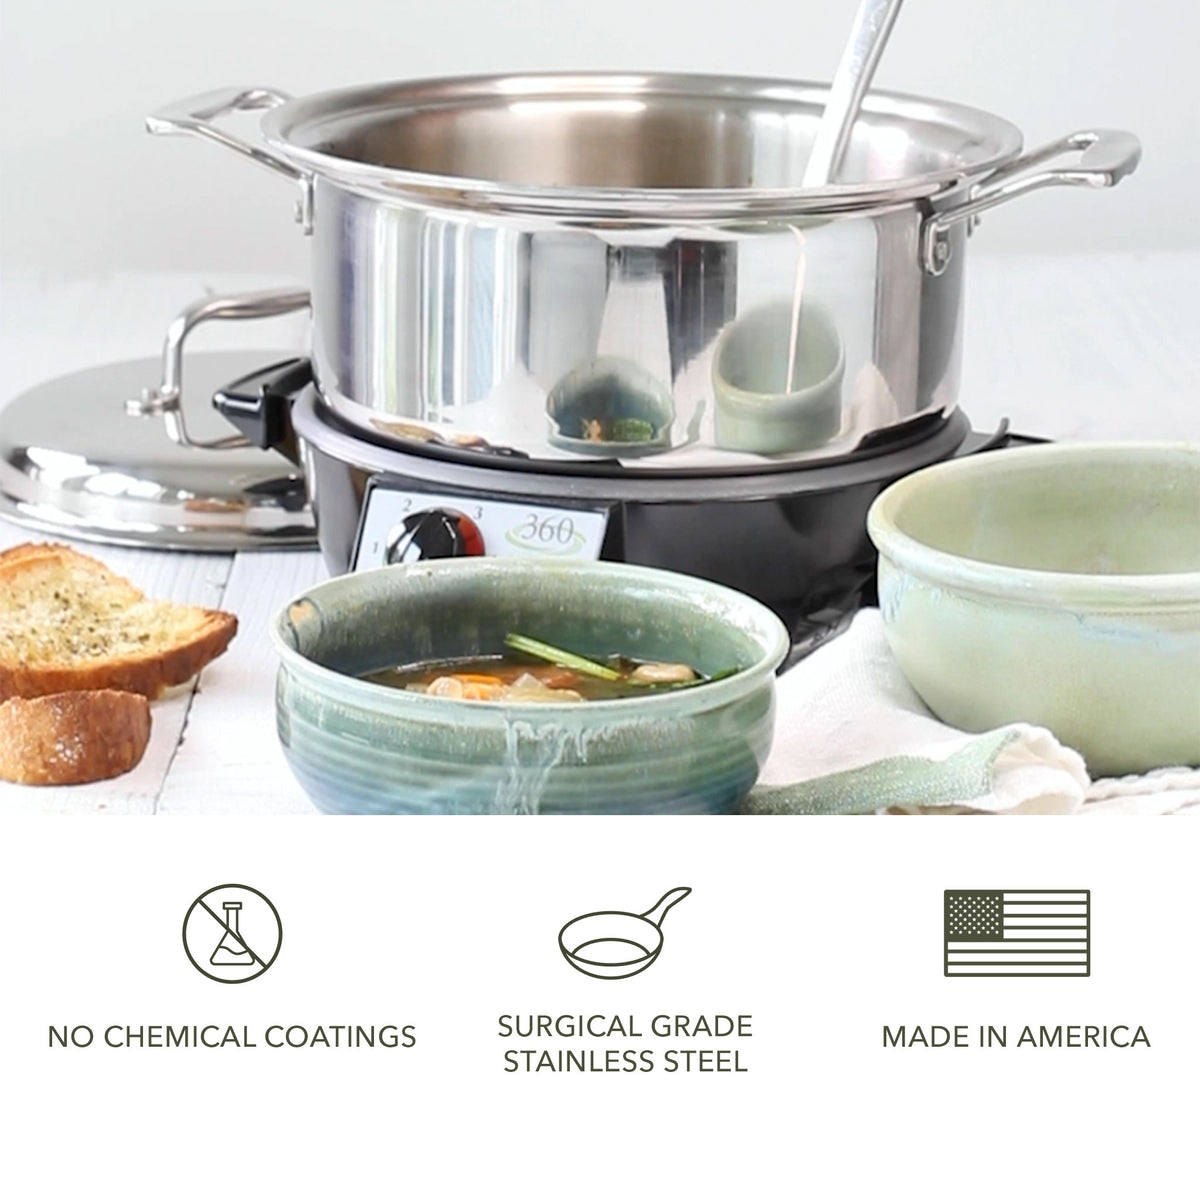 https://www.longaberger.shop/wp-content/uploads/1691/43/360-cookware-4-quart-slow-cooker-set-360-cookware-the-more-you-spend-the-greater-discount-youll-get_7.jpg